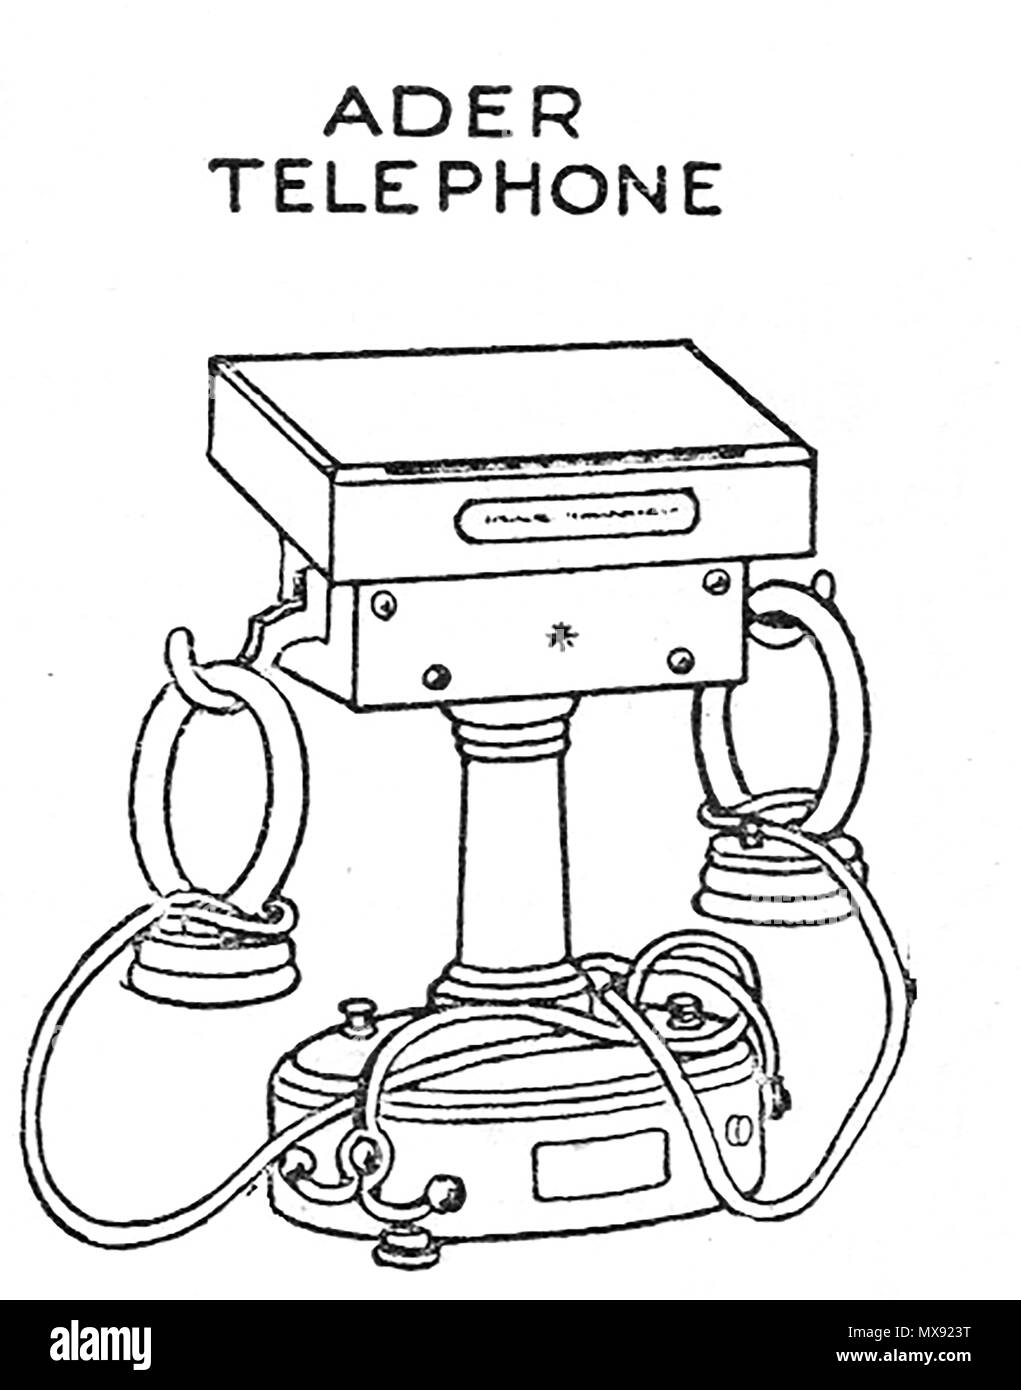 Early telephone equipment - A 1930's illustration of an Ader telephone apparatus device Stock Photo